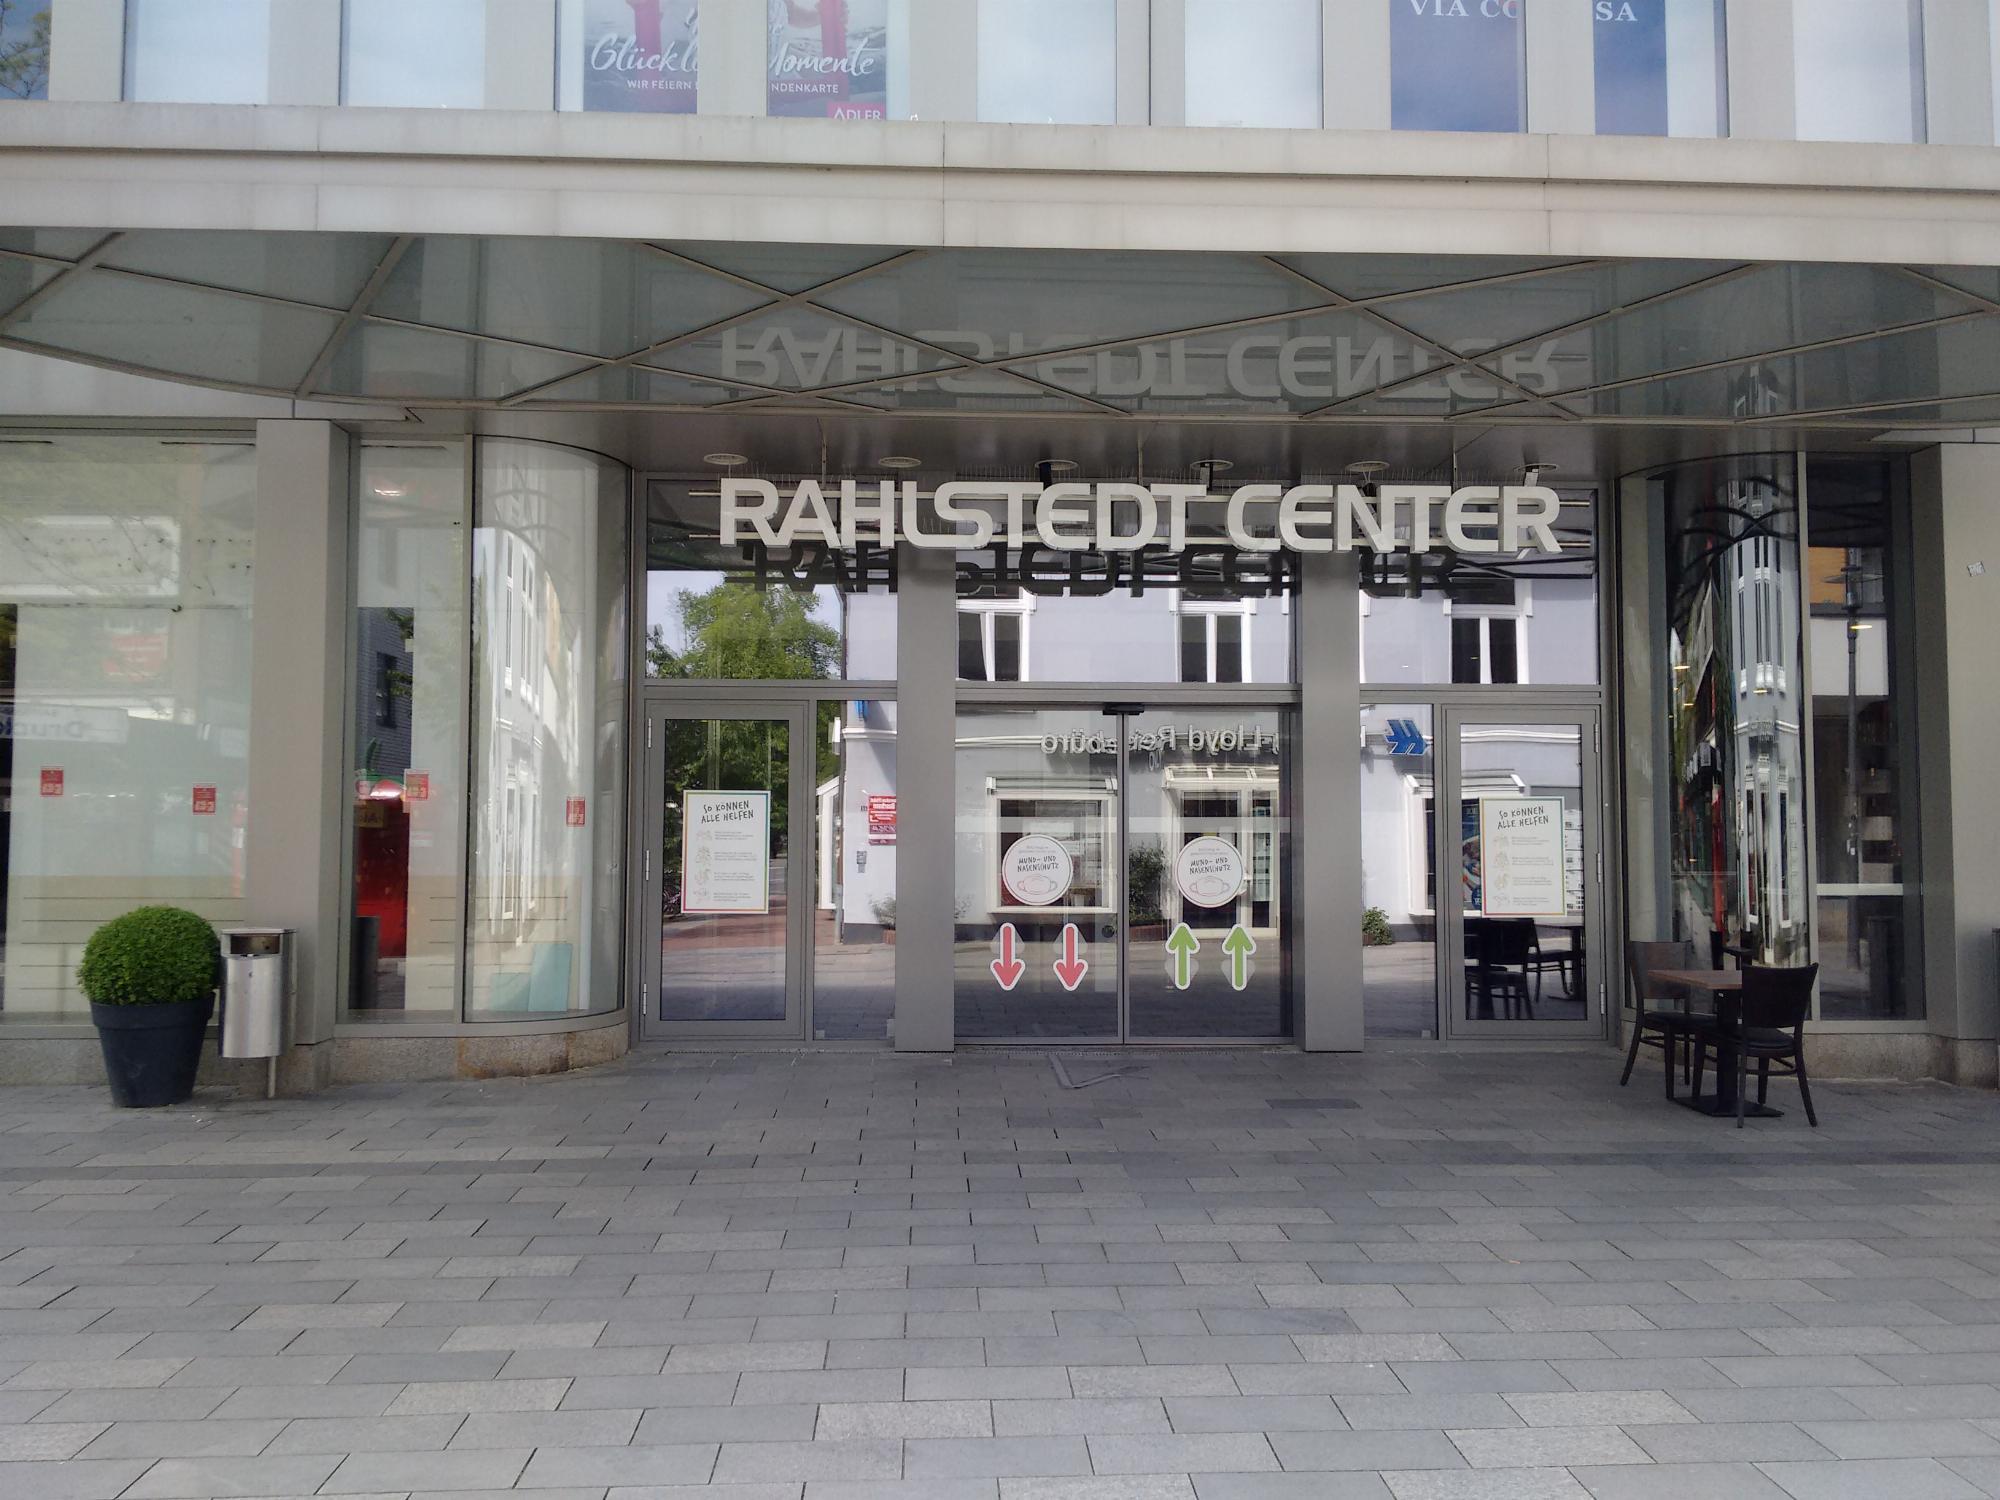 Rahlstedt Center